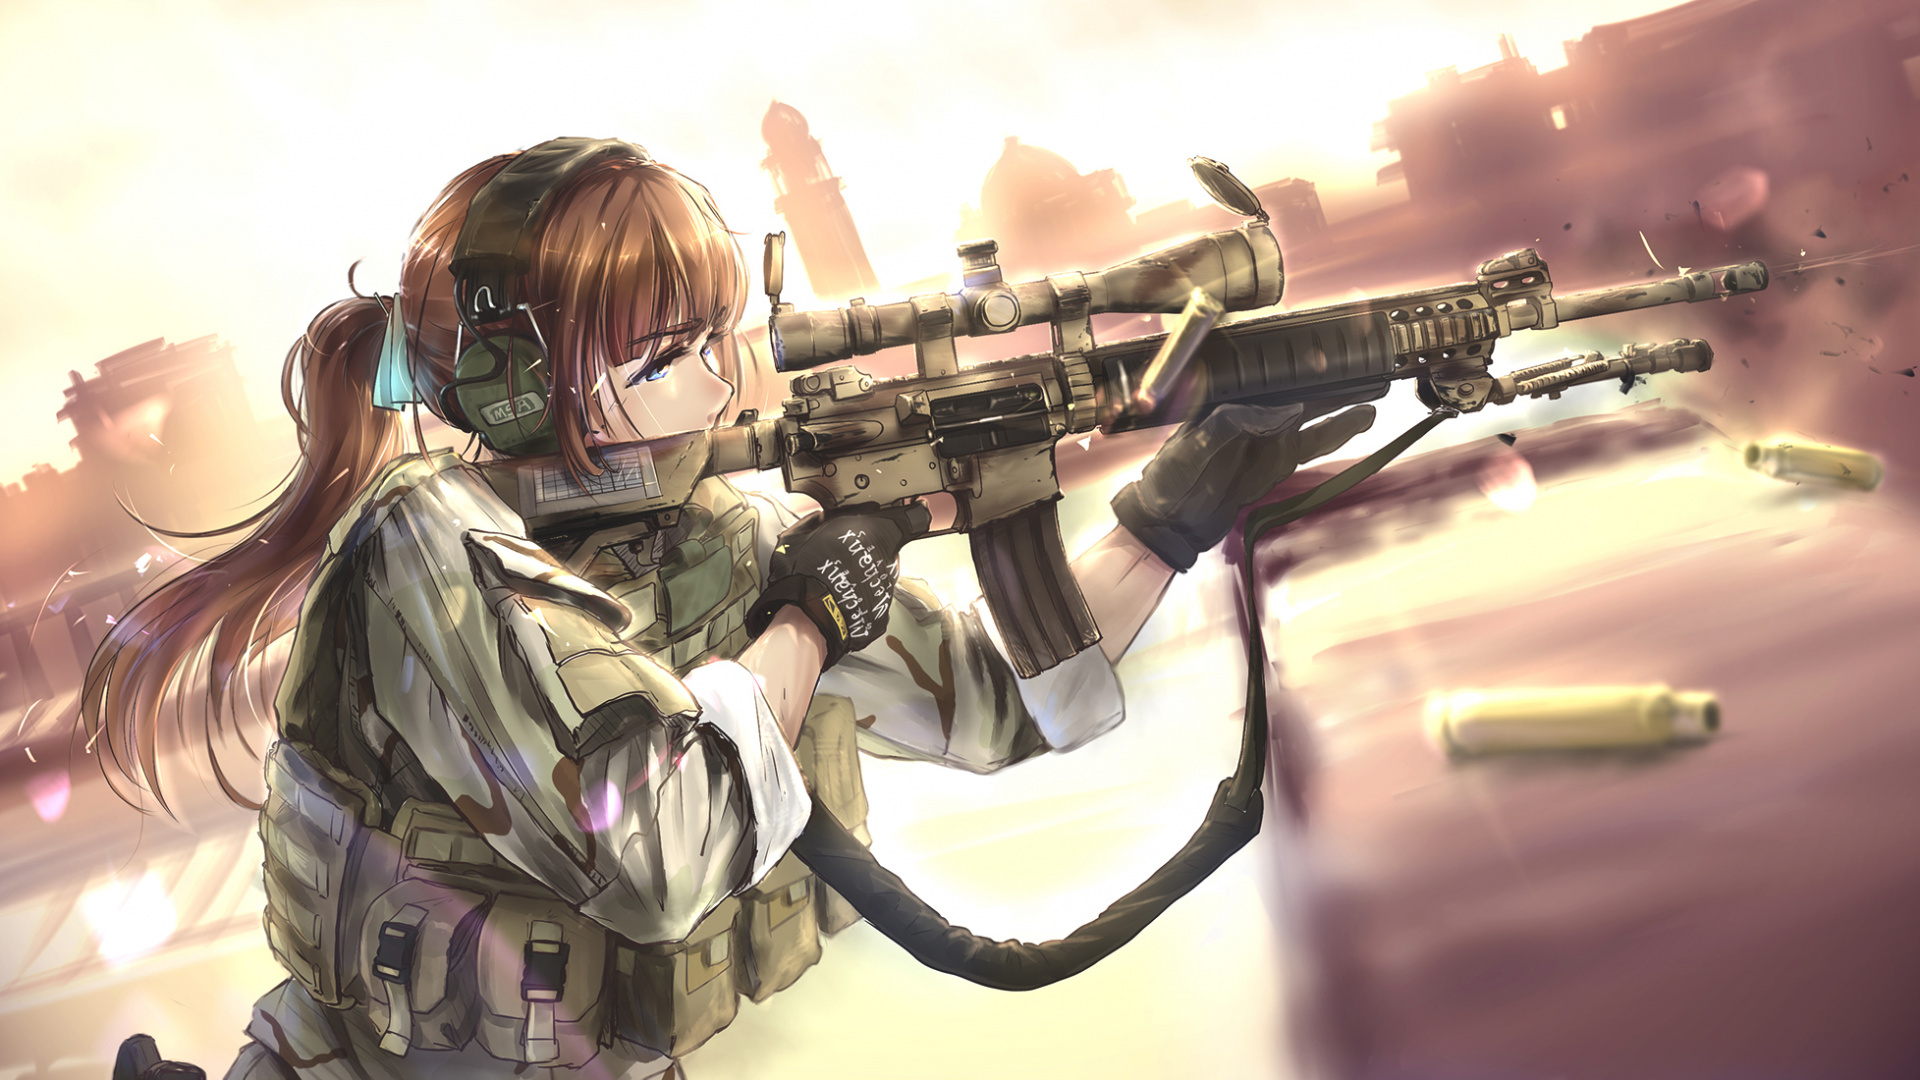 Woman in Green and Brown Camouflage Uniform Holding Rifle. Wallpaper in 1920x1080 Resolution